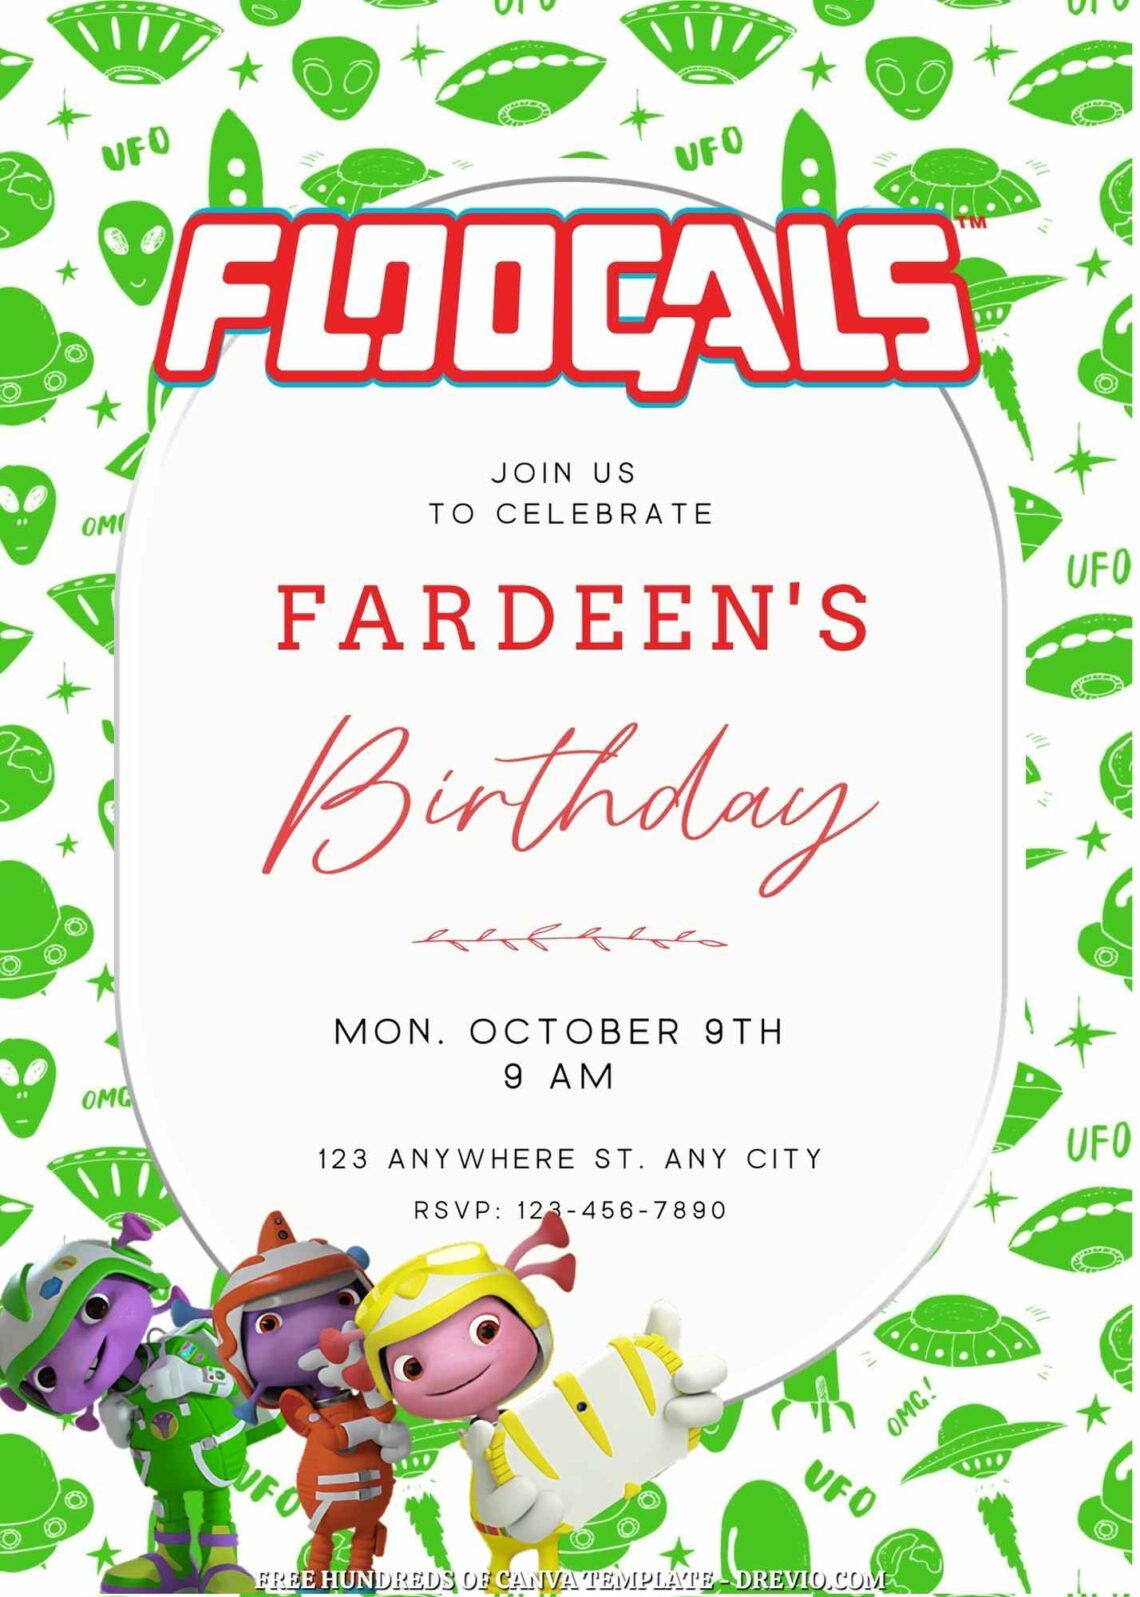 Free Floogals Birthday Invitation Templates with Green Spaceship in the Background